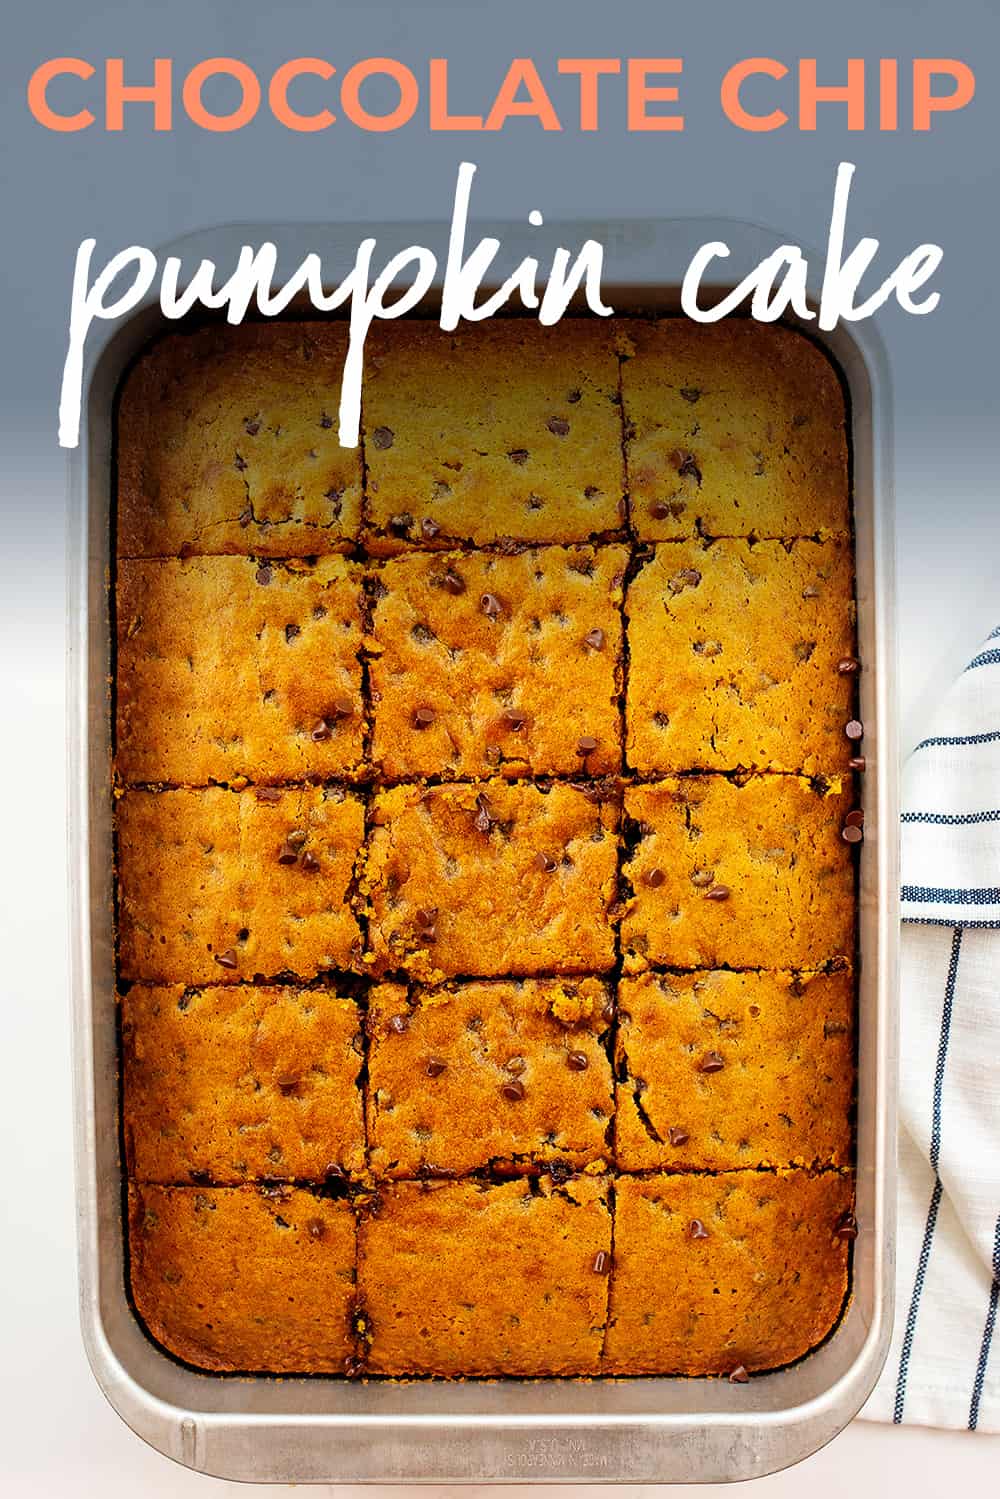 chocolate chip pumpkin cake in metal baking pan with text for Pinterest.